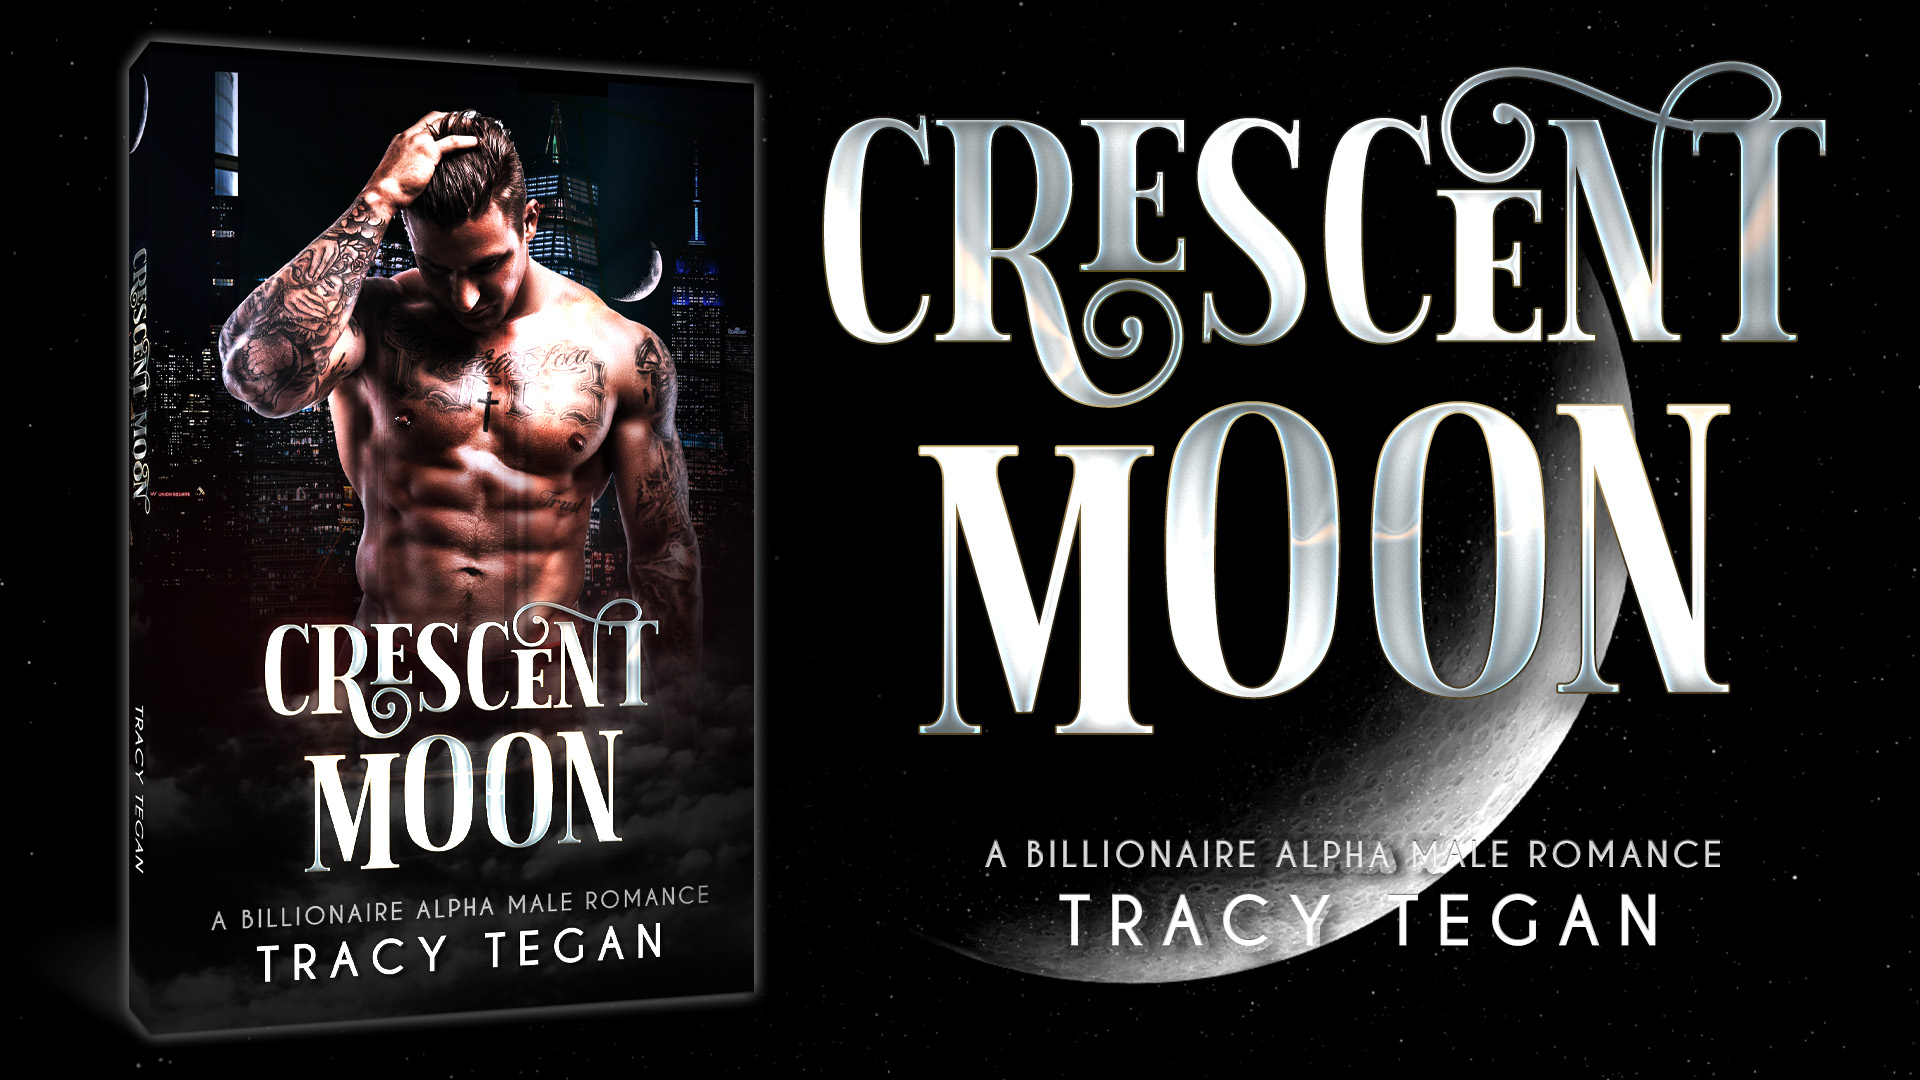 Crescent Moon by Tracy Tegan